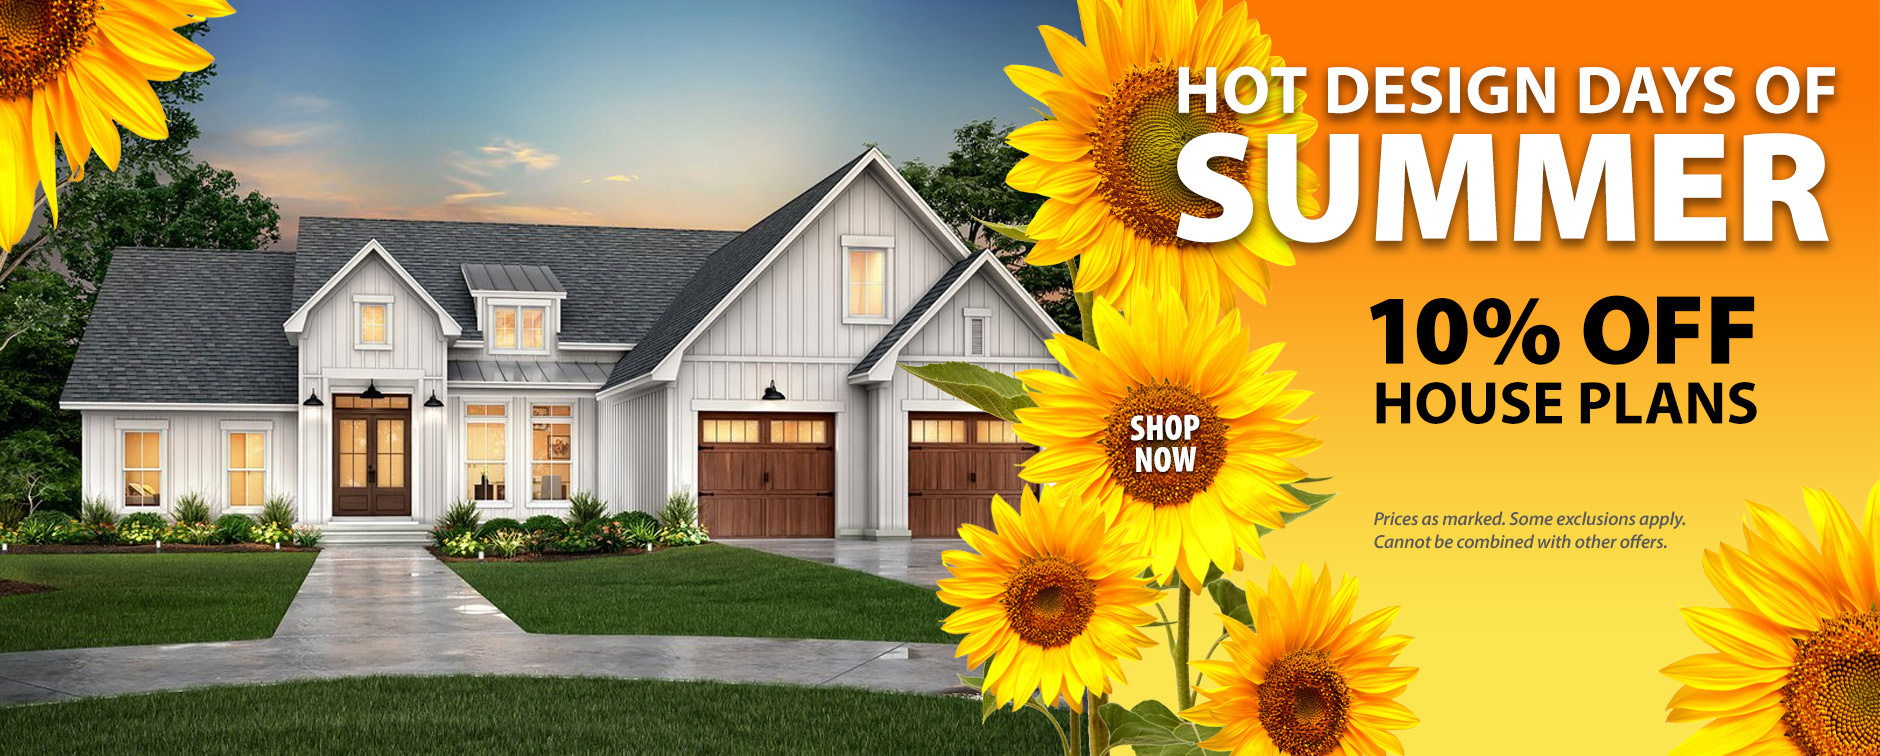 Take 10% Off House Plans Now!